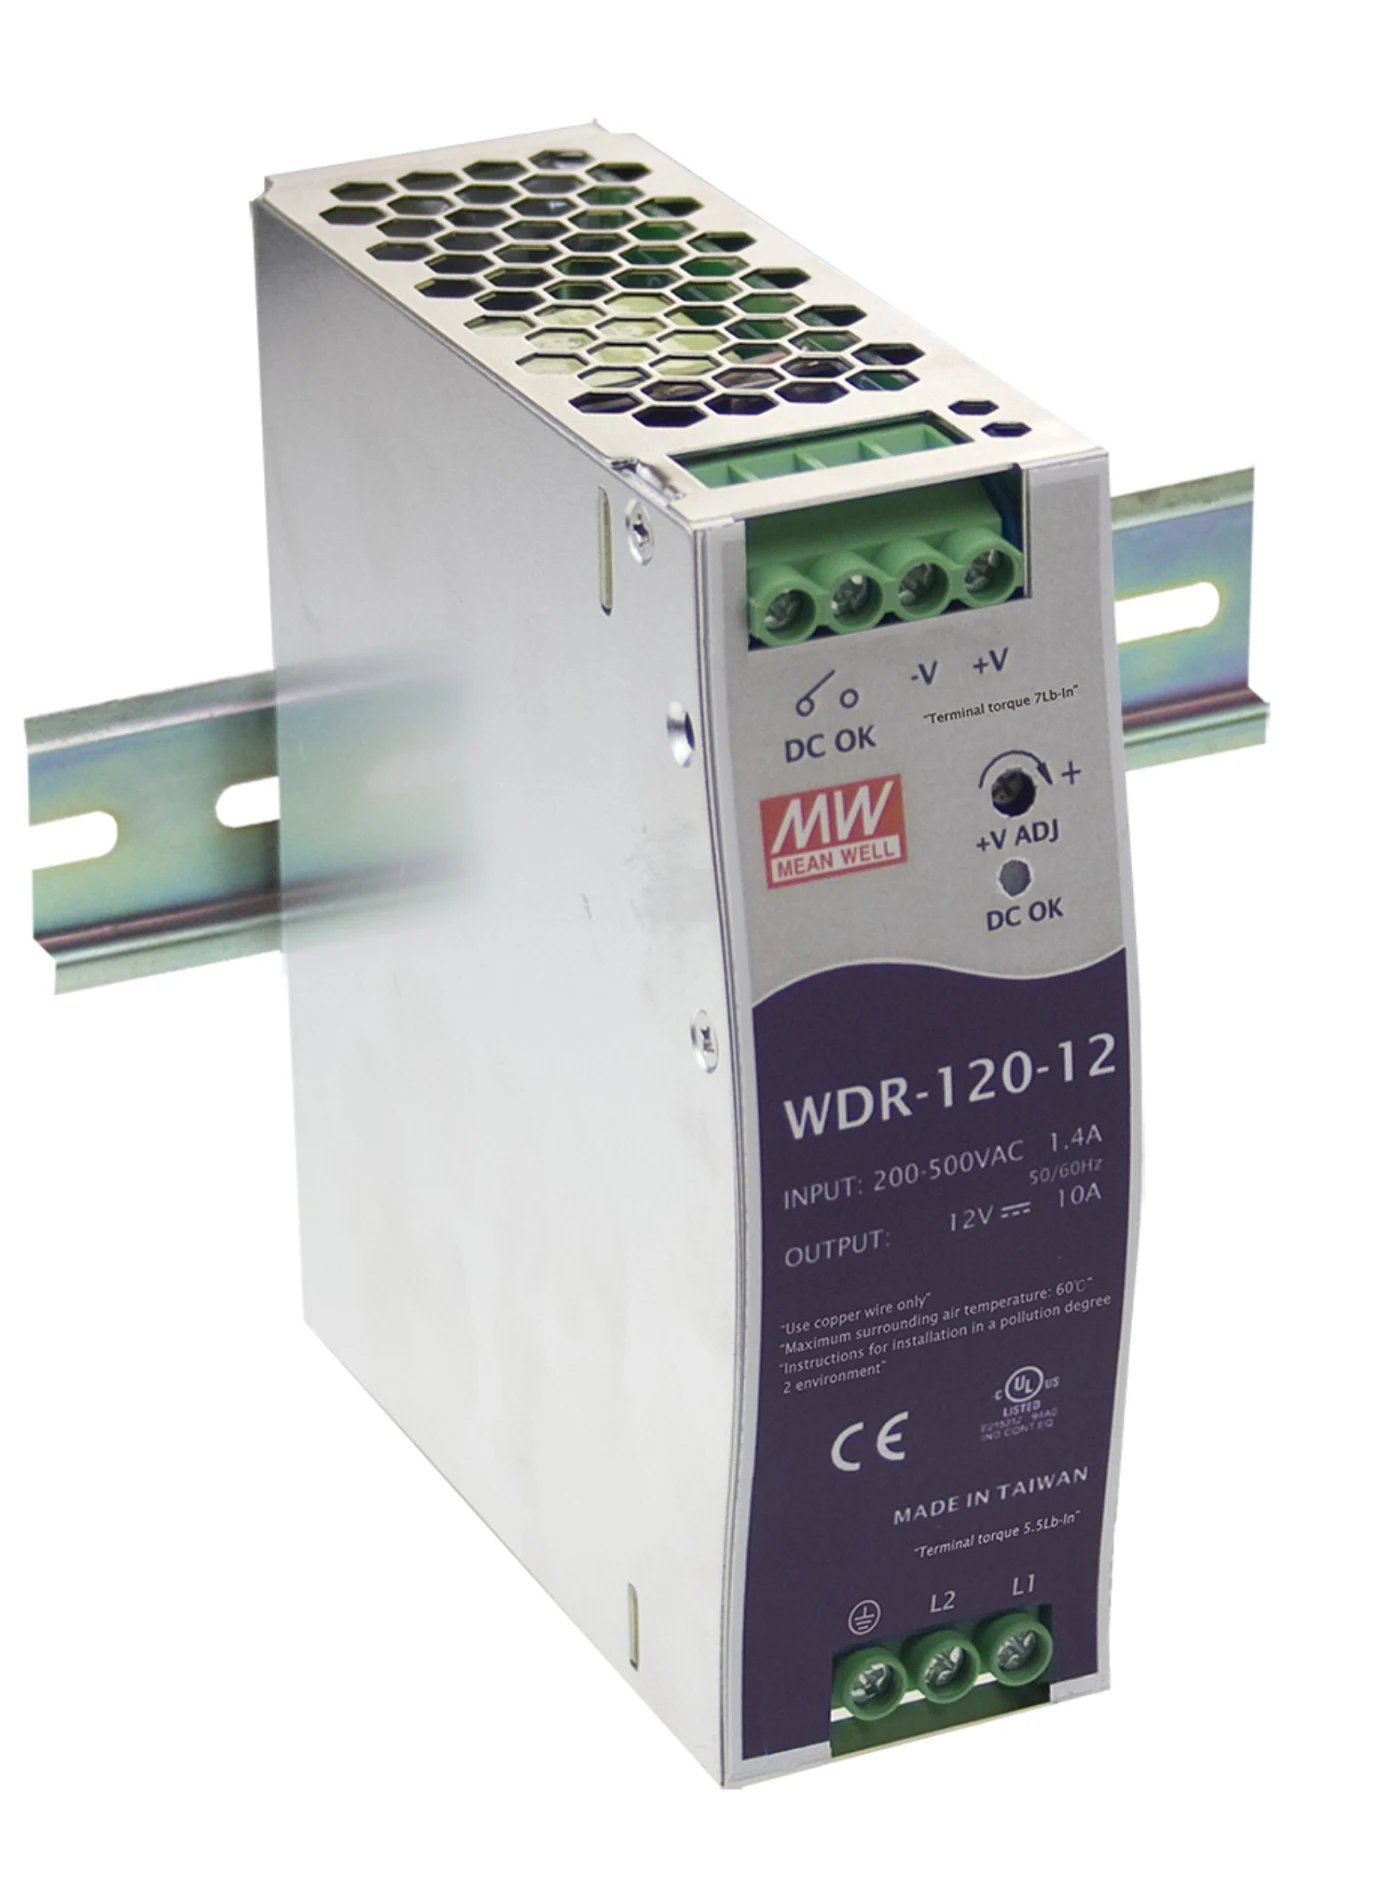 

kindly MEAN WELL 6Pack WDR-120-12 12V 10A meanwell WDR-120 12V 120W Single Output Industrial DIN RAIL Power Supply